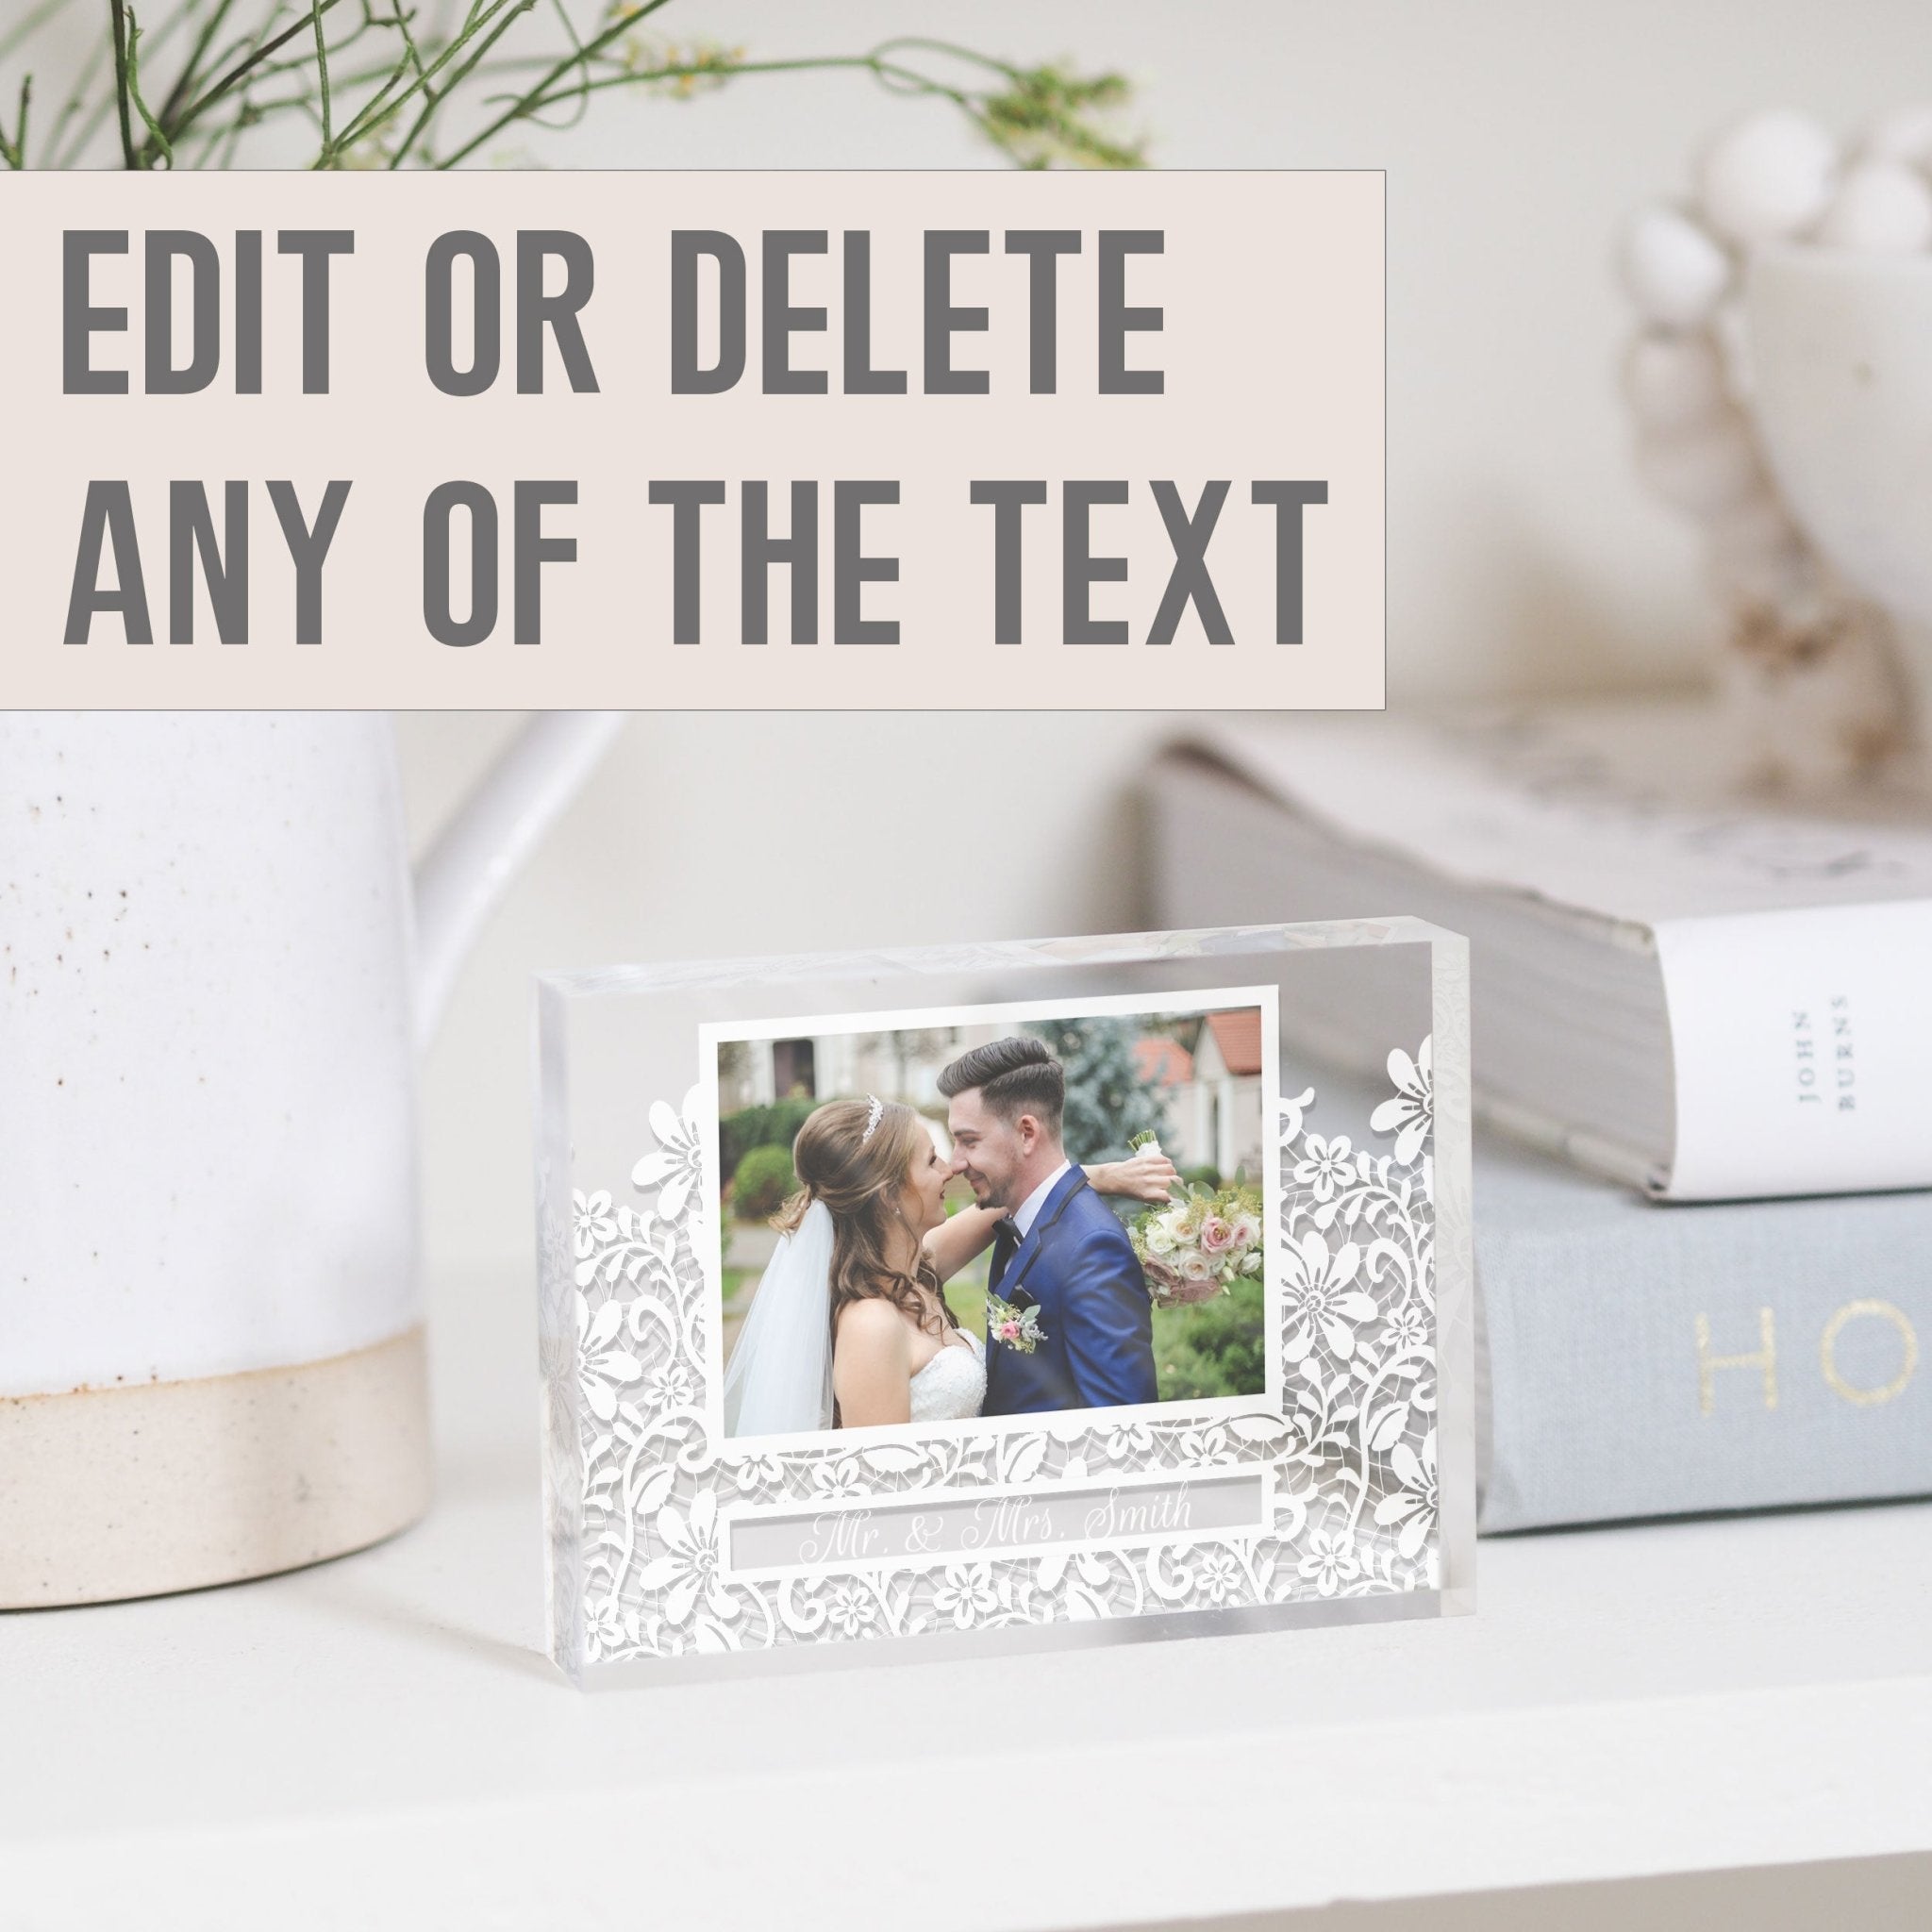 Best Friend Wedding Gift To Bride | Personalized Wedding Gift For Couple | Our Wedding Day Picture Frame PhotoBlock - Unique Prints